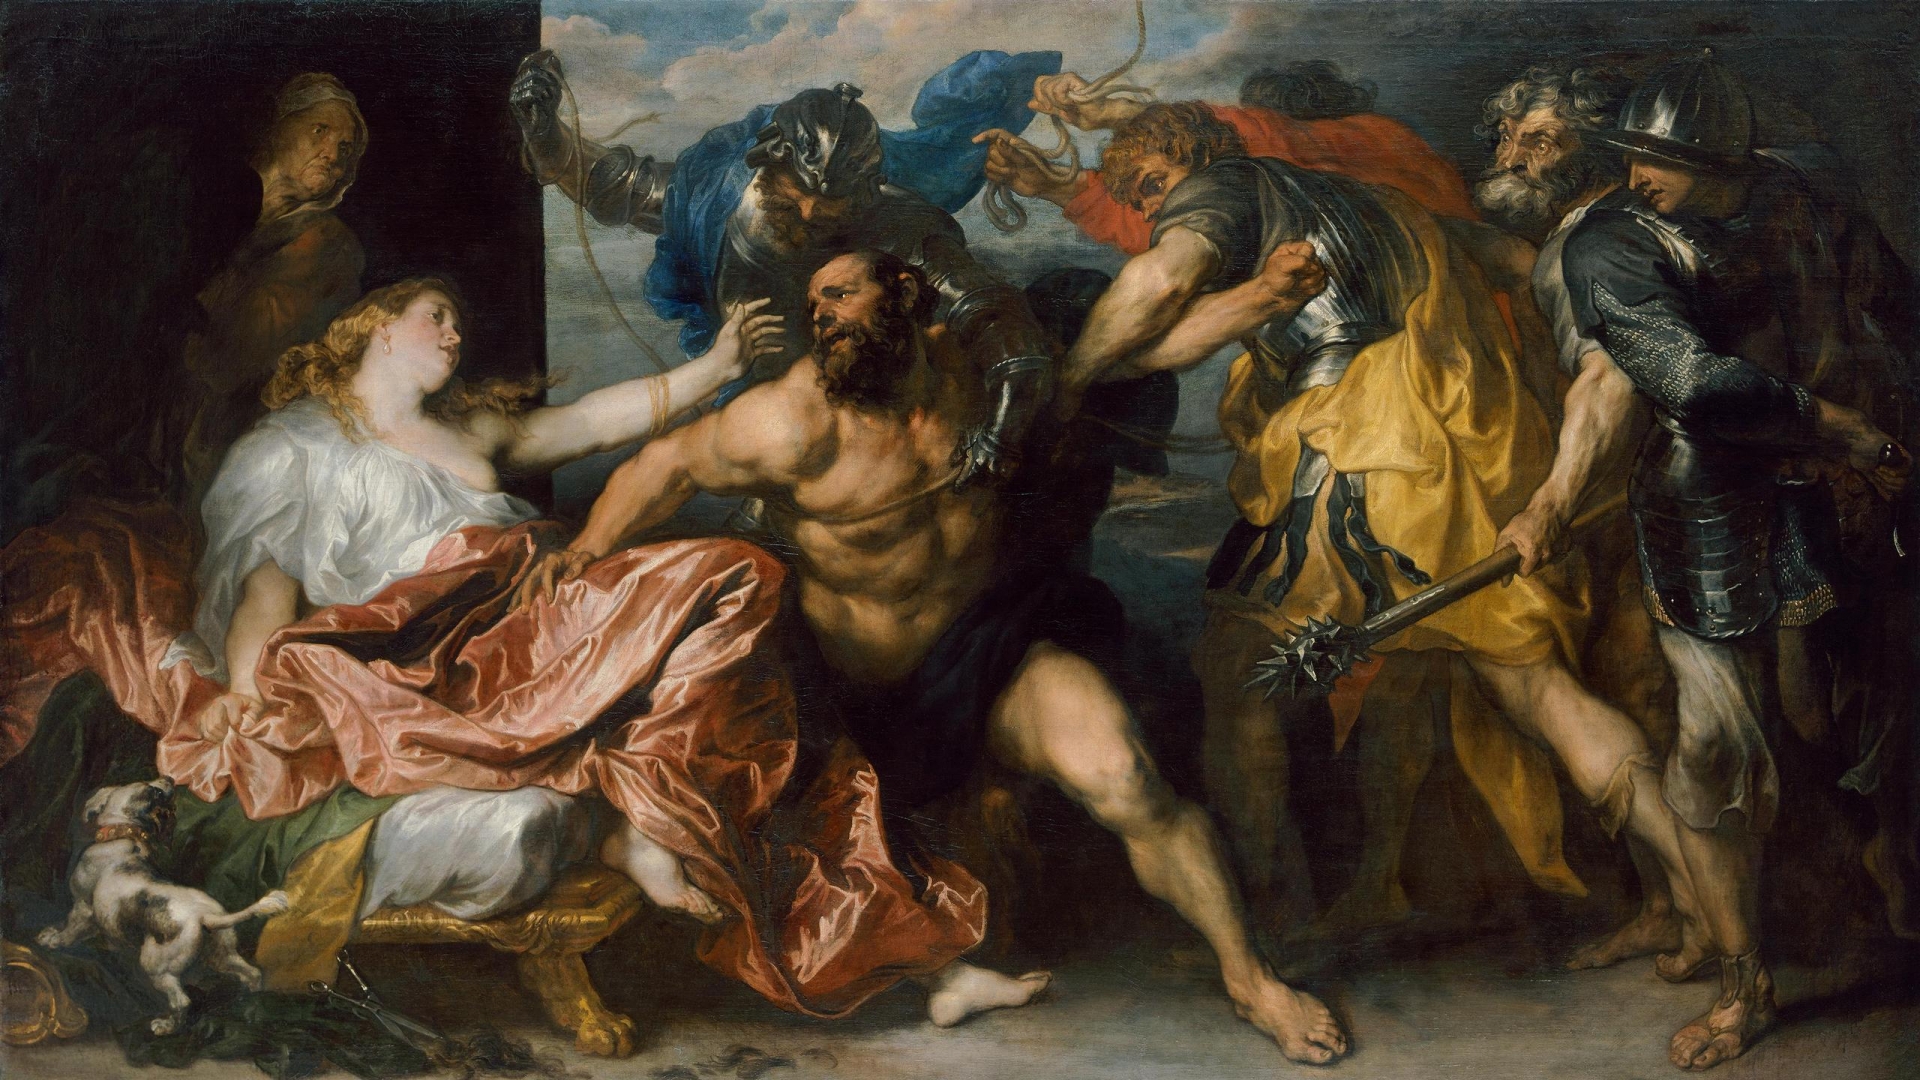 The Taking of Samson Painting for 1920 x 1080 HDTV 1080p resolution